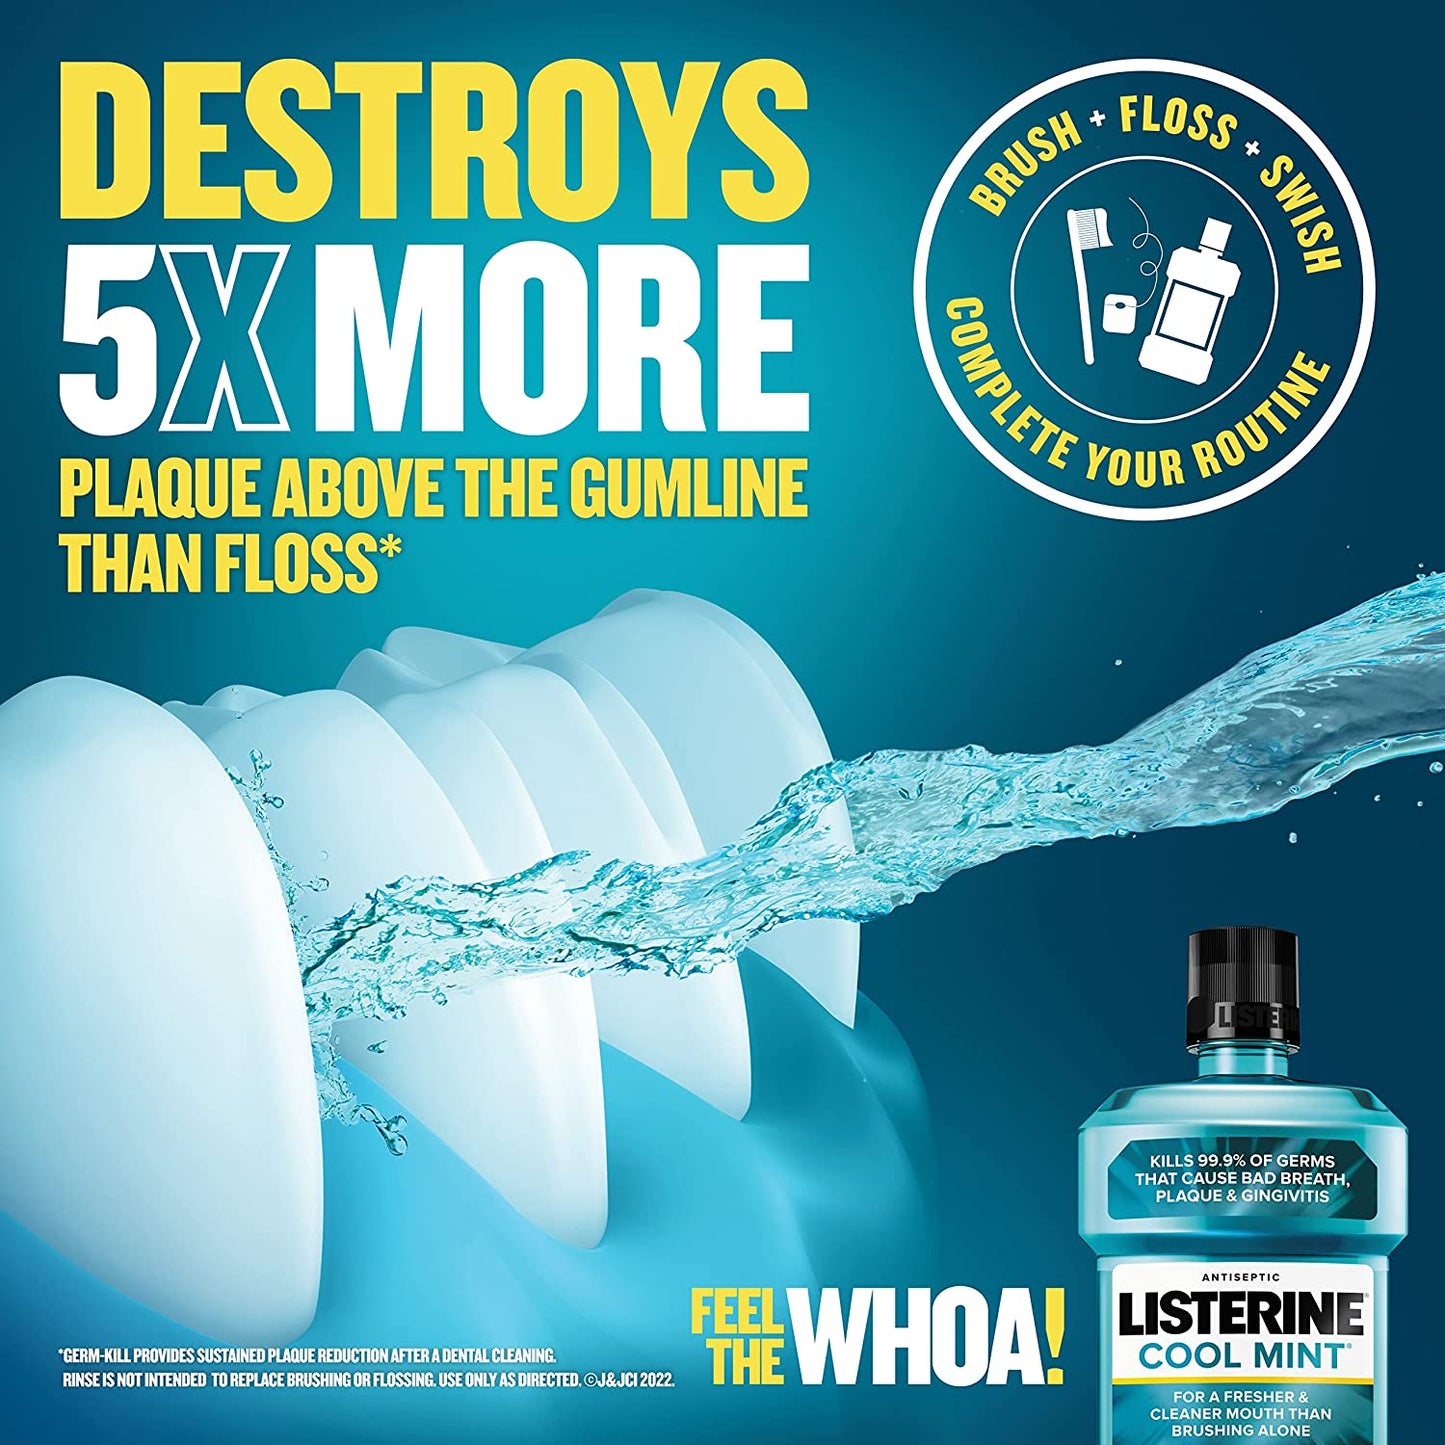 Listerine Cool Mint Antiseptic For A Fresher & Cleaner Mouth Than Brushing Alone - 1.5L